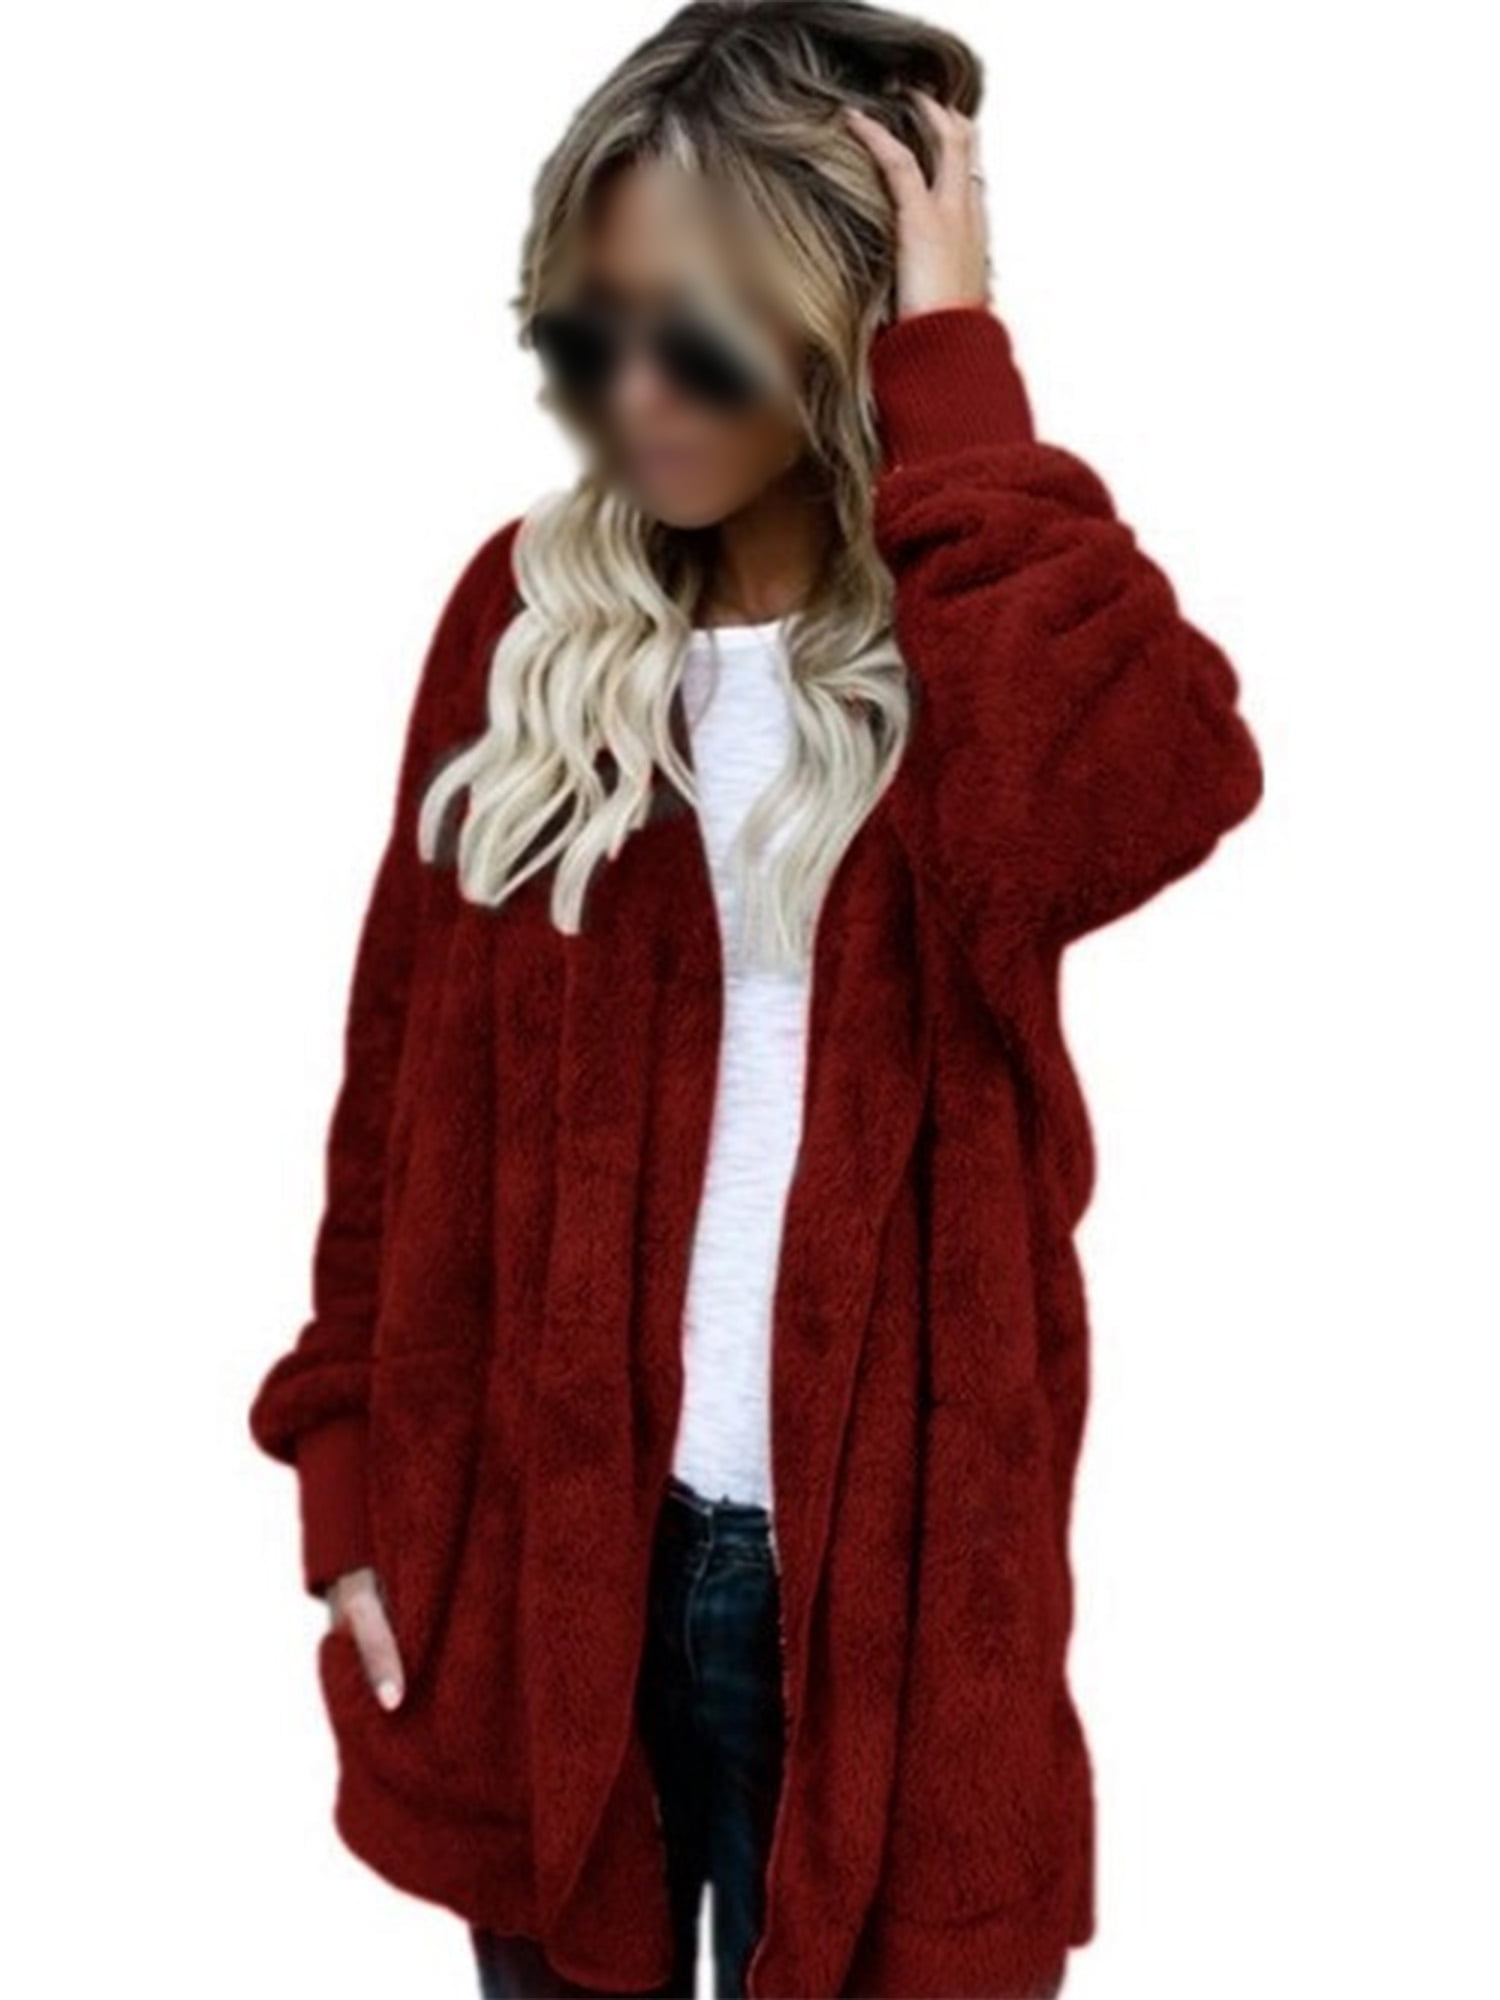 Fleece Cardigans for Women Casual Long Sleeve Fuzzy Open Front Hooded Jacket Coat with Pockets 